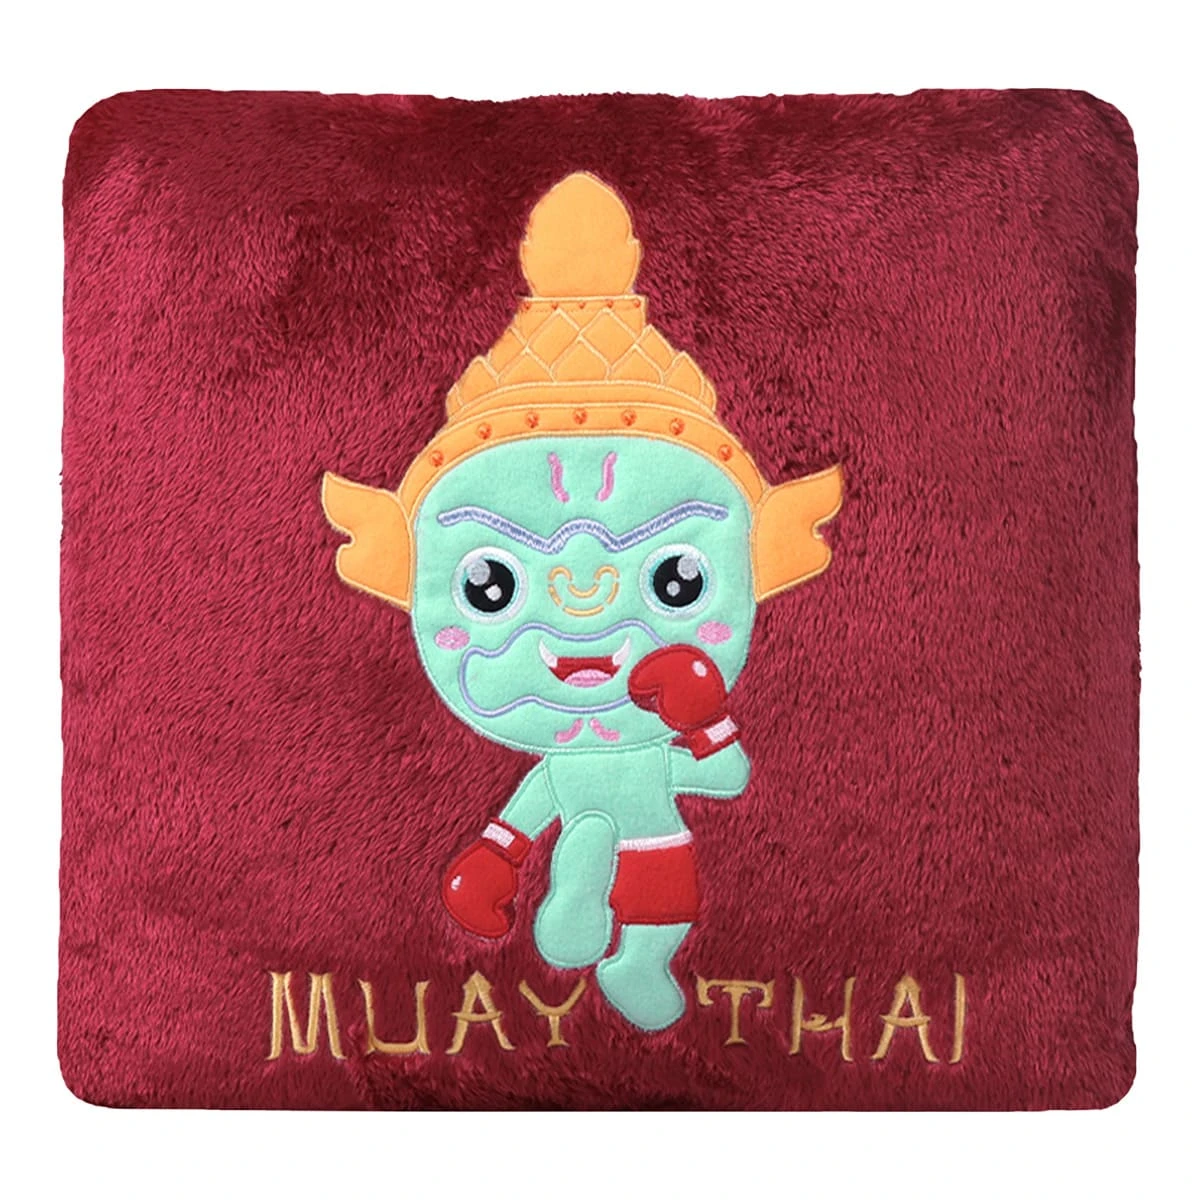 Recycled Polyester Muay Thai Giant Plush Pillow Blanket (Red)